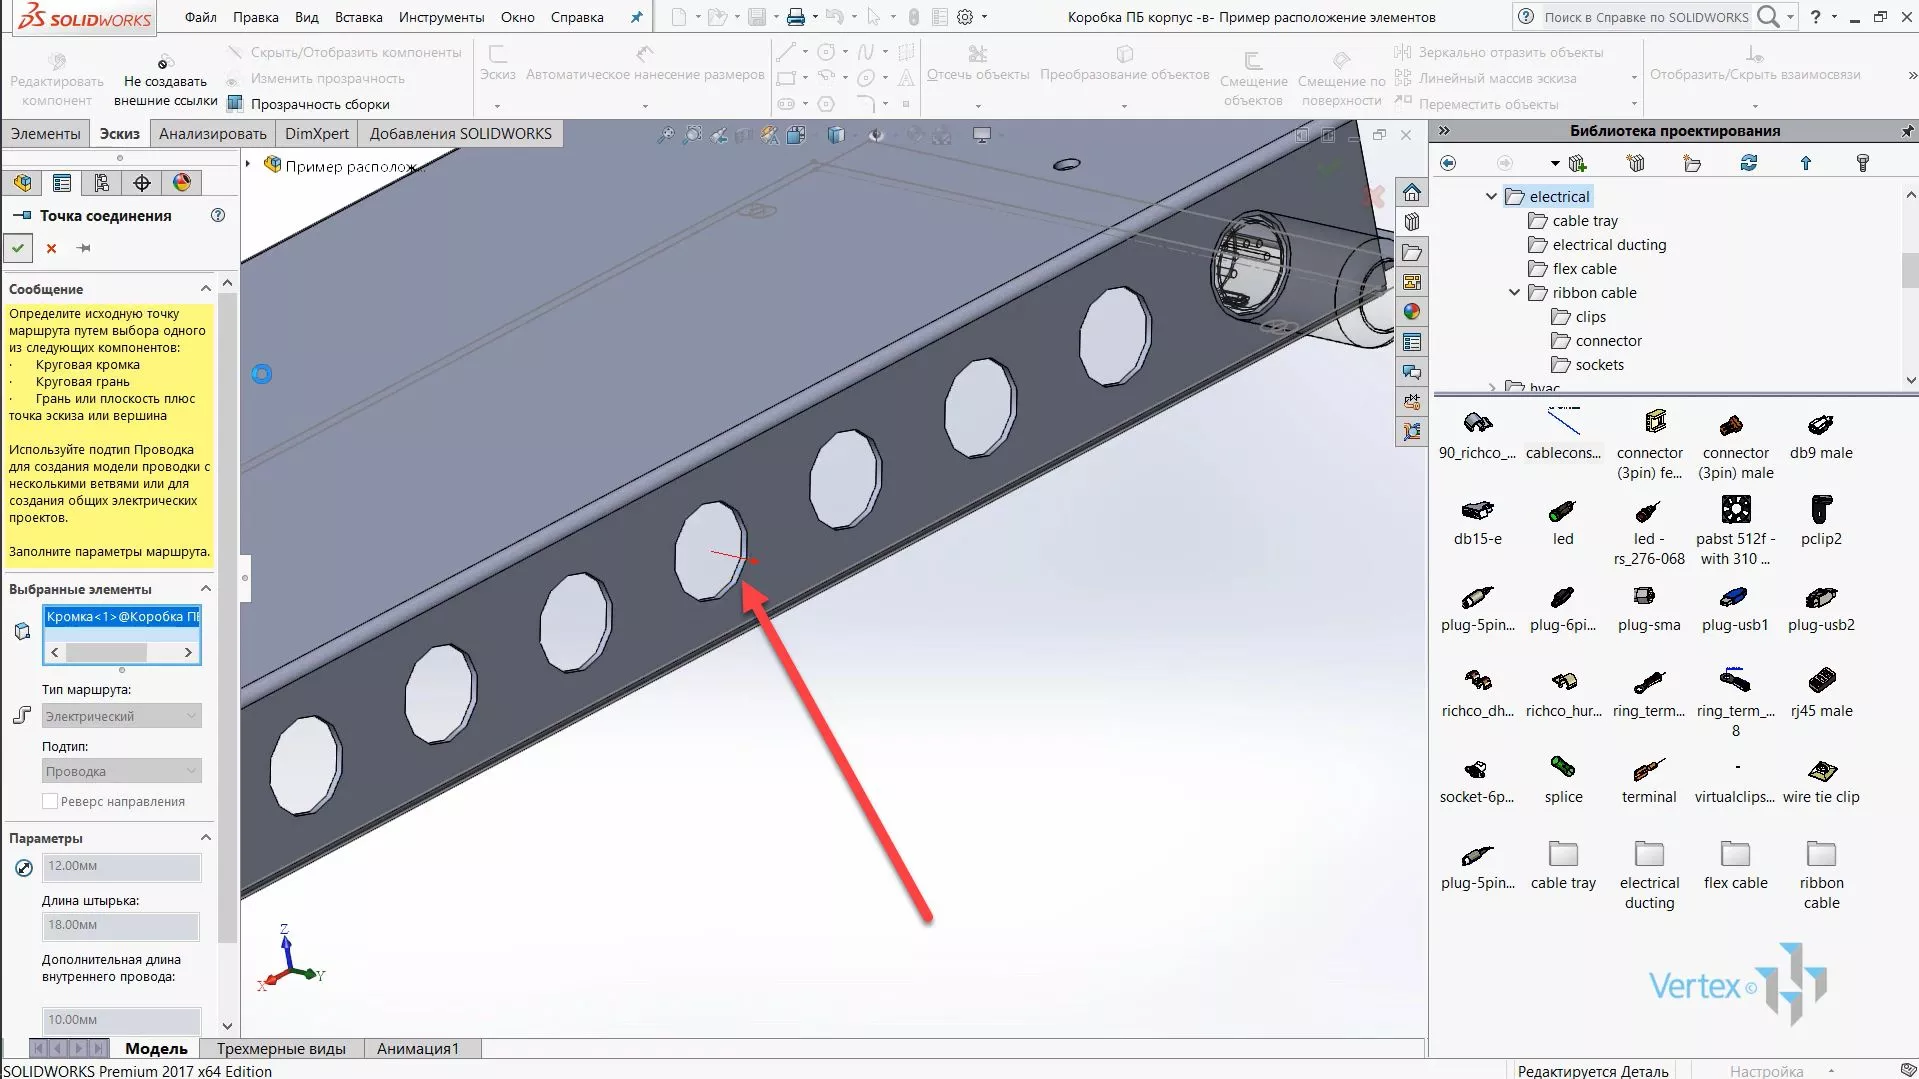 SOLIDWORKS Routing 18